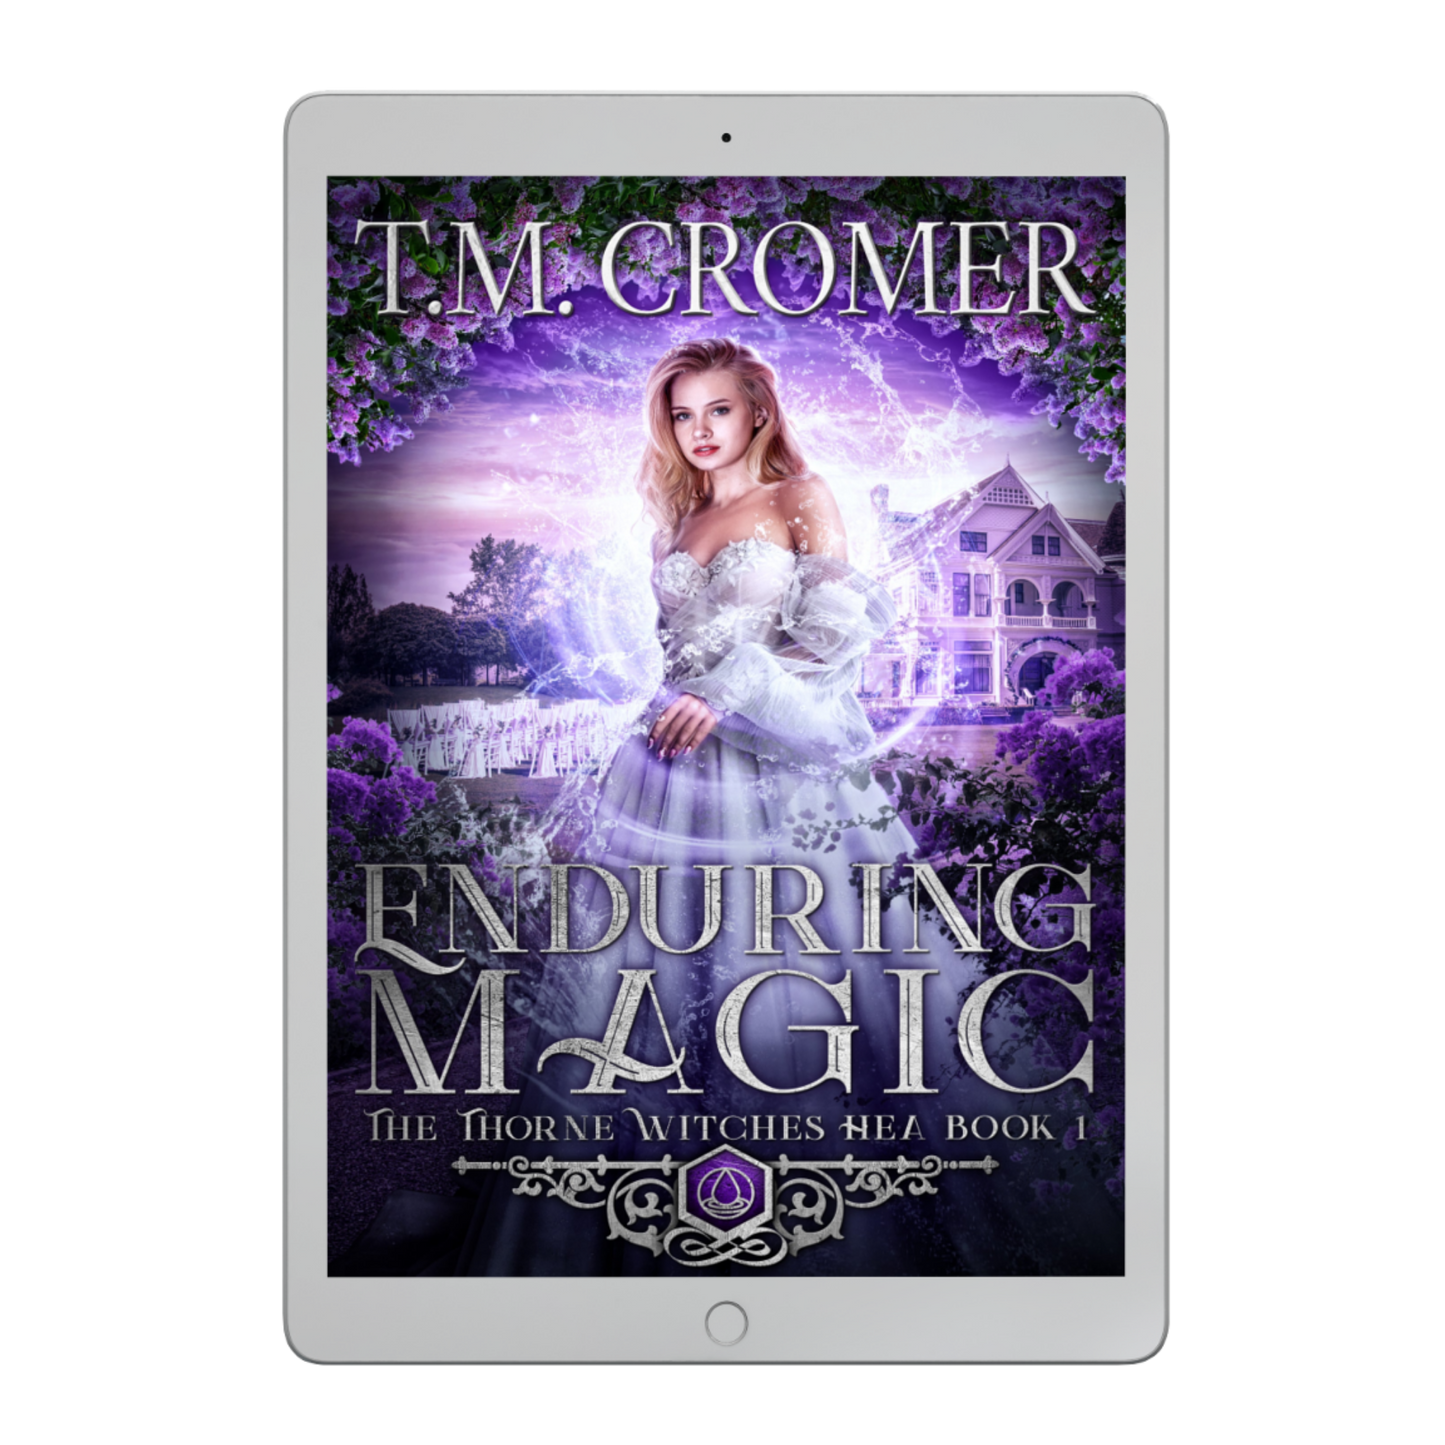 Enduring Magic The Thorne Witches HEA #1 Ebook Paranormal Romance, Urban Fantasy, Magical Realism